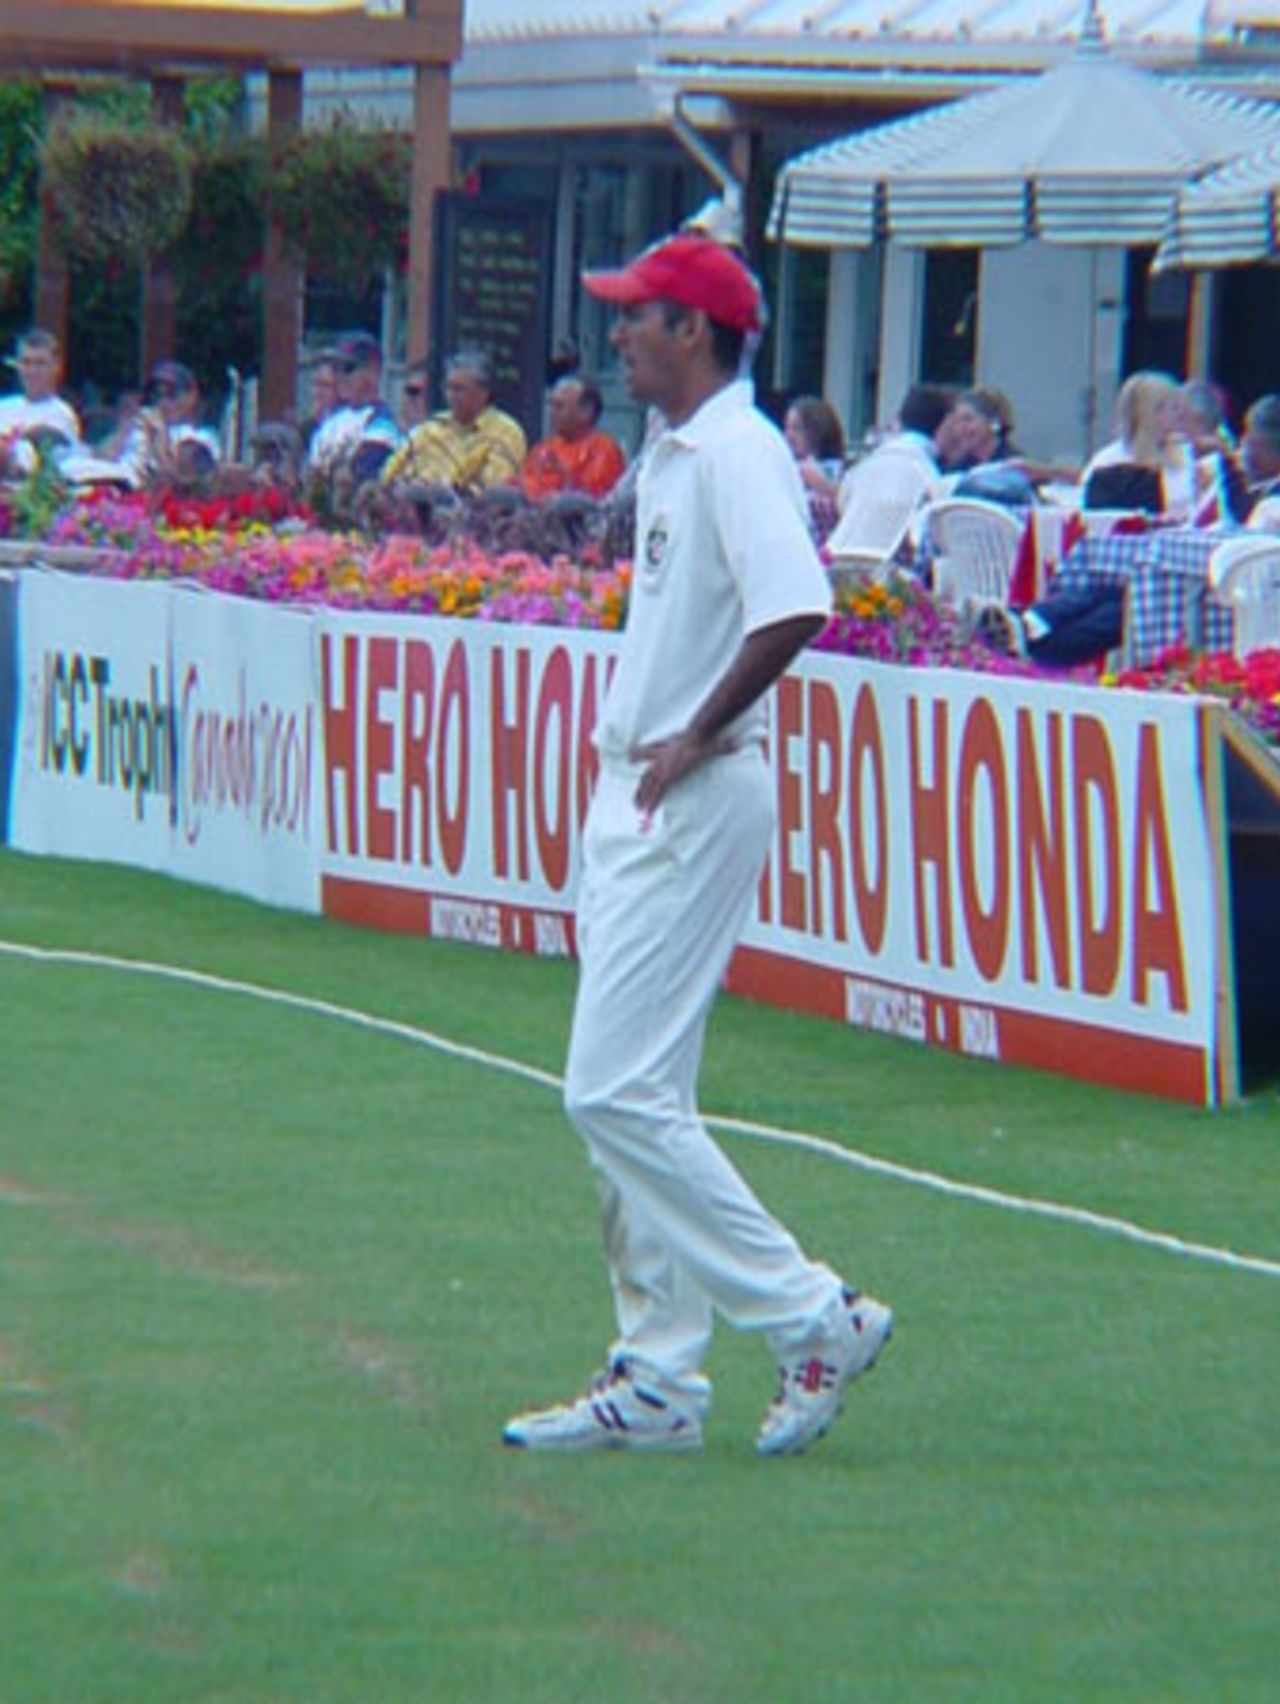 Canadian left arm orthodox spin bowler Barry Seebaran looks to the middle as he fields at long off. ICC Trophy 2001: Canada v Scotland, Toronto Cricket, Skating and Curling Club, 17 July 2001.